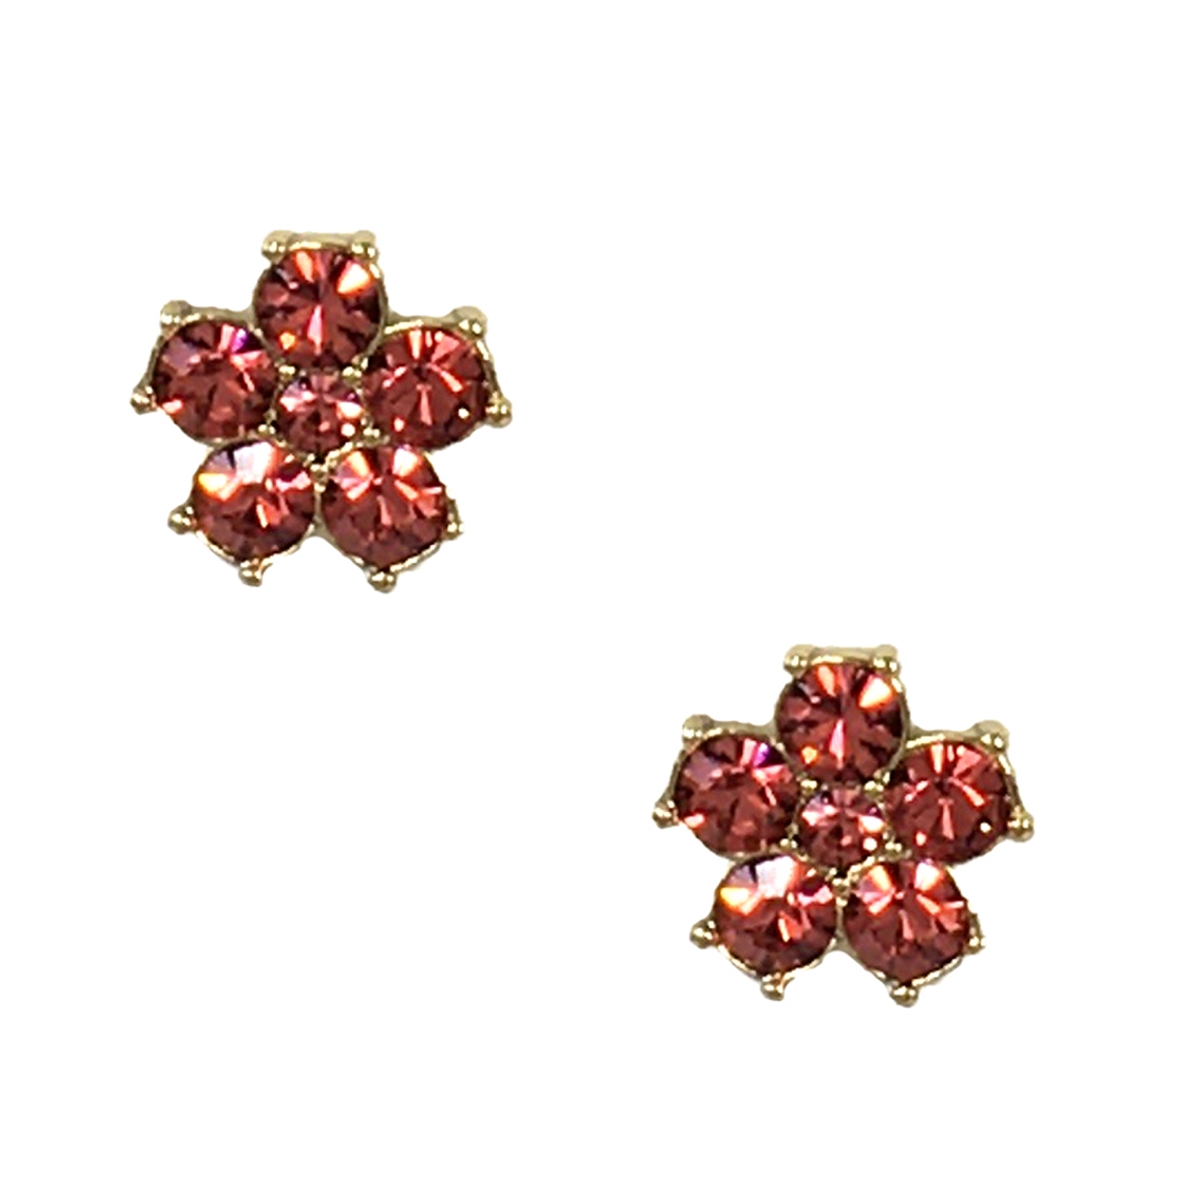 kate spade | Jewelry | Kate Spade Rose Gold Something Sparkly Crystal Clear  Earrings | Poshmark